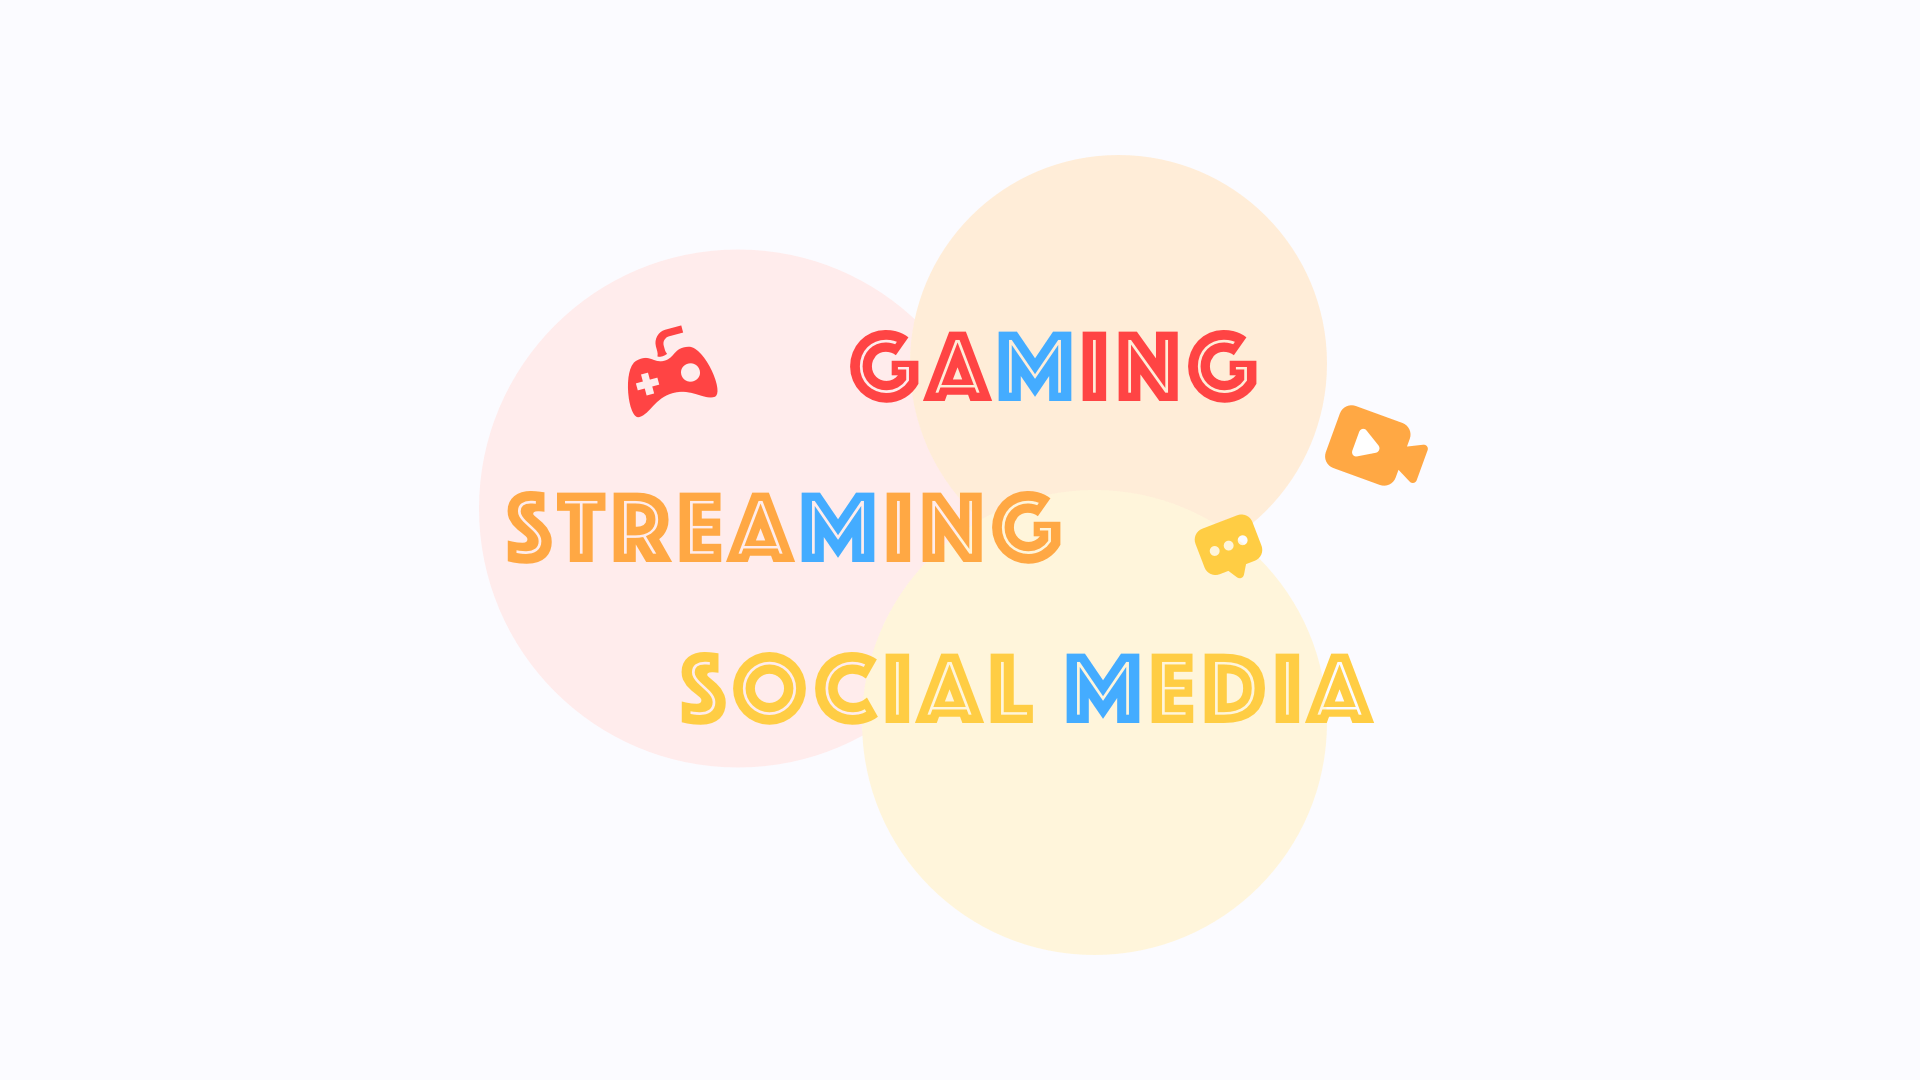 The perfect server for stream game and social media needs